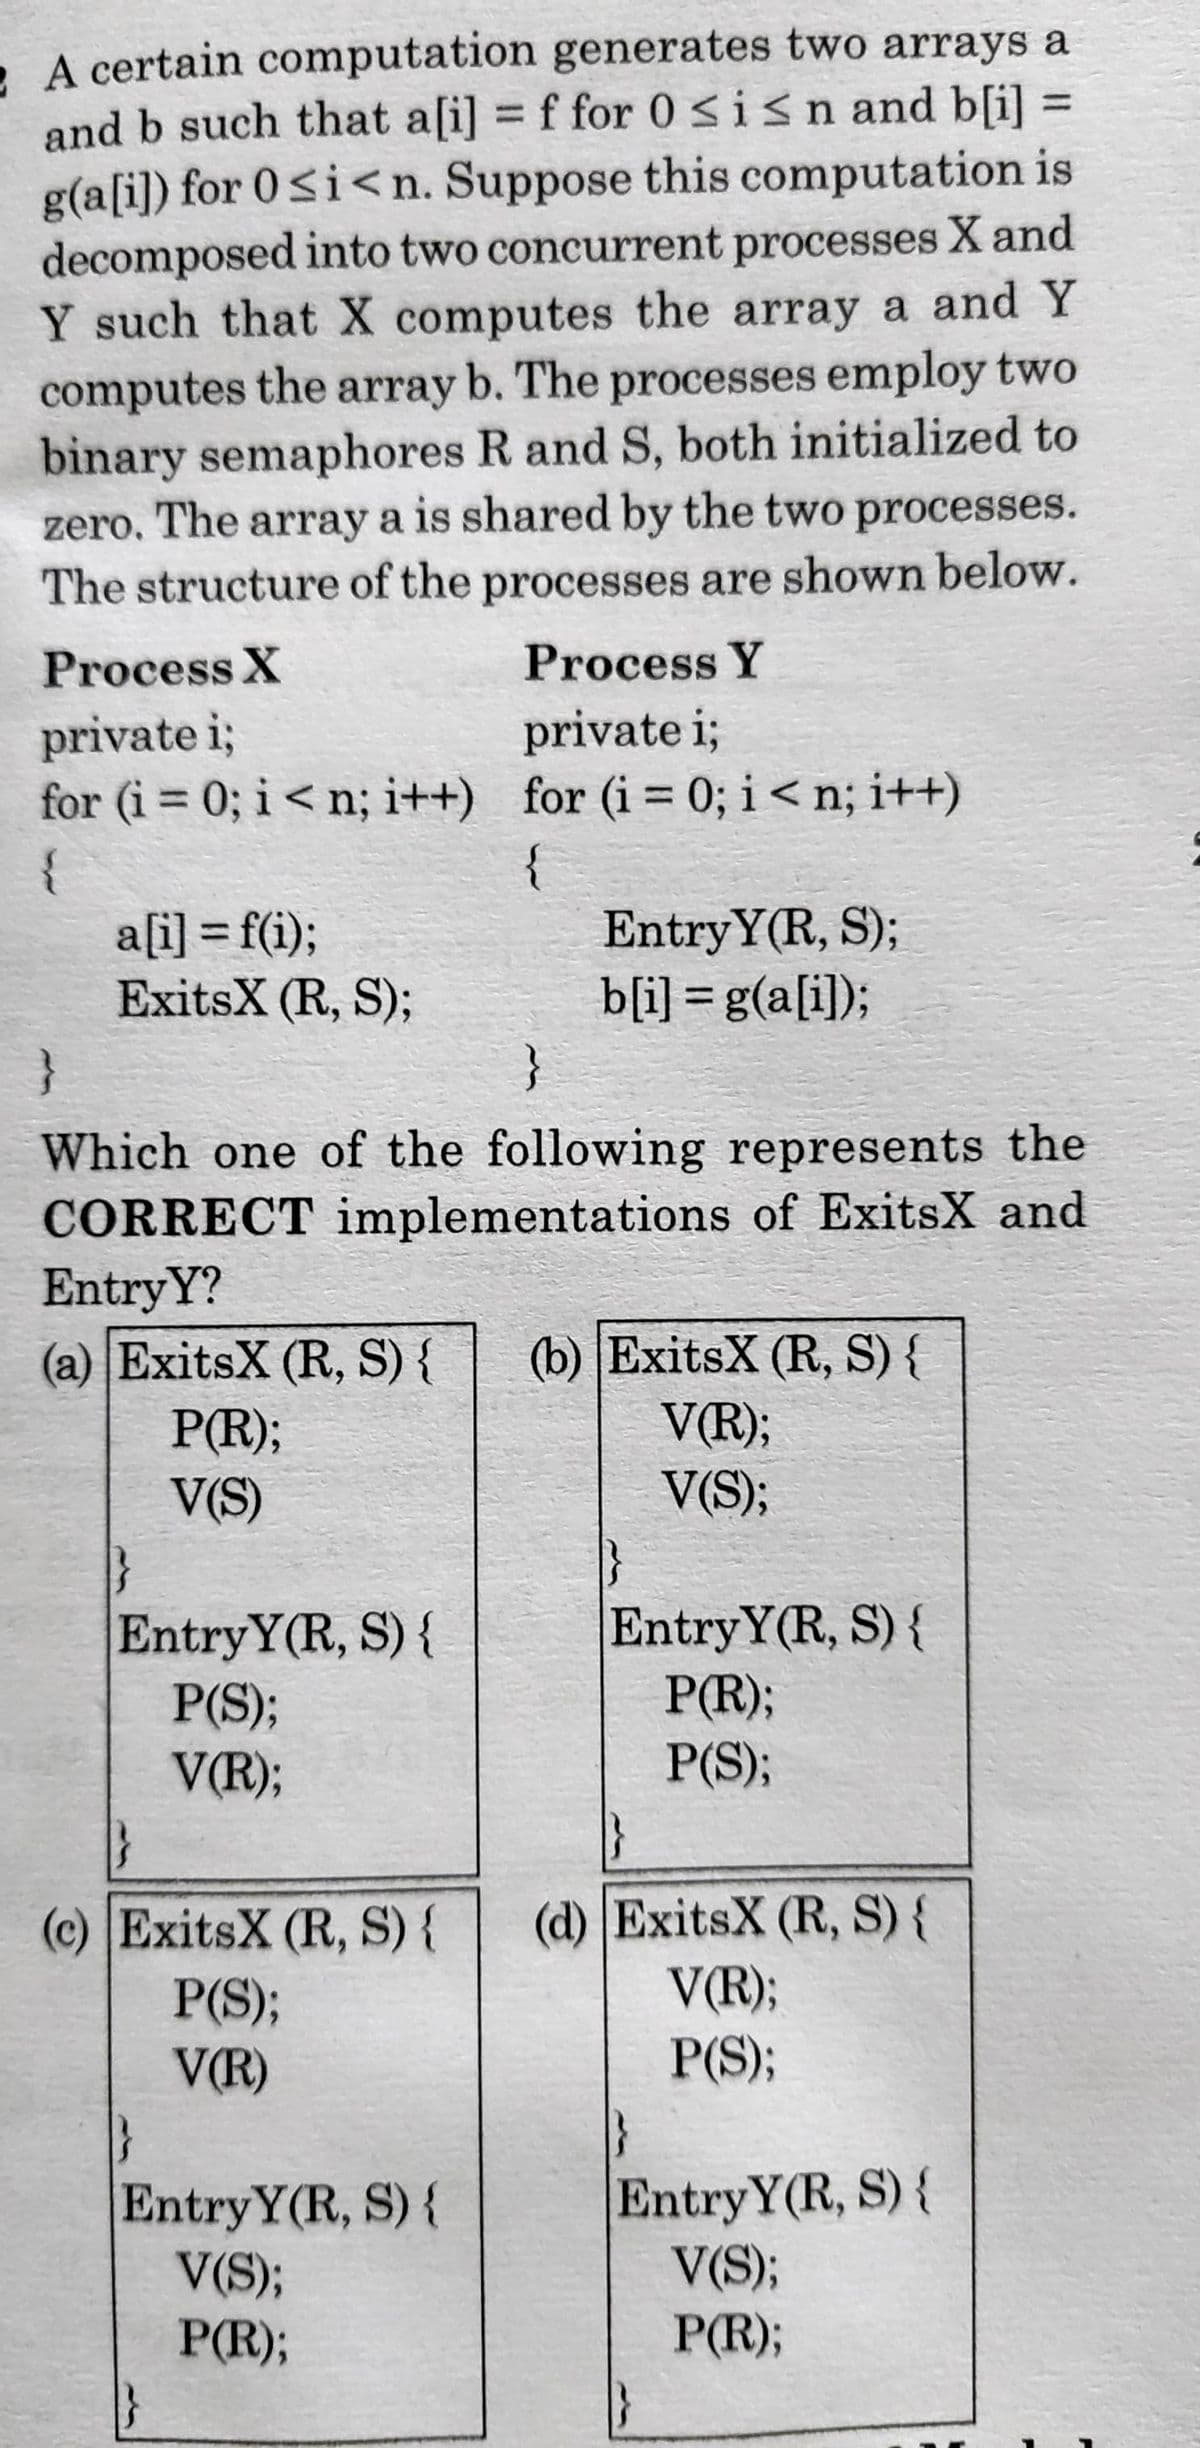 . A certain computation generates two arrays a
and b such that a[i] = f for 0Sisn and b[i] =
g(a[i]) for 0<i<n. Suppose this computation is
decomposed into two concurrent processes X and
Y such that X computes the array a and Y
computes the array b. The processes employ two
binary semaphores R and S, both initialized to
zero, The array a is shared by the two processes.
The structure of the processes are shown below.
%3D
%3D
Process X
Process Y
private i;
private i;
for (i = 0; i < n; i++) for (i = 0; i <n; i++)
%3D
%3D
{
a[i] = f(i);
ExitsX (R, S);
{
EntryY(R, S);
b[i] = g(a[i]);
}
Which one of the following represents the
CORRECT implementations of ExitsX and
EntryY?
(a) ExitsX (R, S) {
P(R);
V(S)
(b) ExitsX (R, S) {
V(R);
V(S);
EntryY(R, S) {
P(S);
V(R);
EntryY(R, S) {
P(R);
P(S);
(d) ExitsX (R, S) {
V(R);
P(S);
(c) ExitsX (R, S) {
P(S);
V(R)
Entry Y(R, S){
V(S);
P(R);
EntryY(R, S){
V(S);
P(R);
